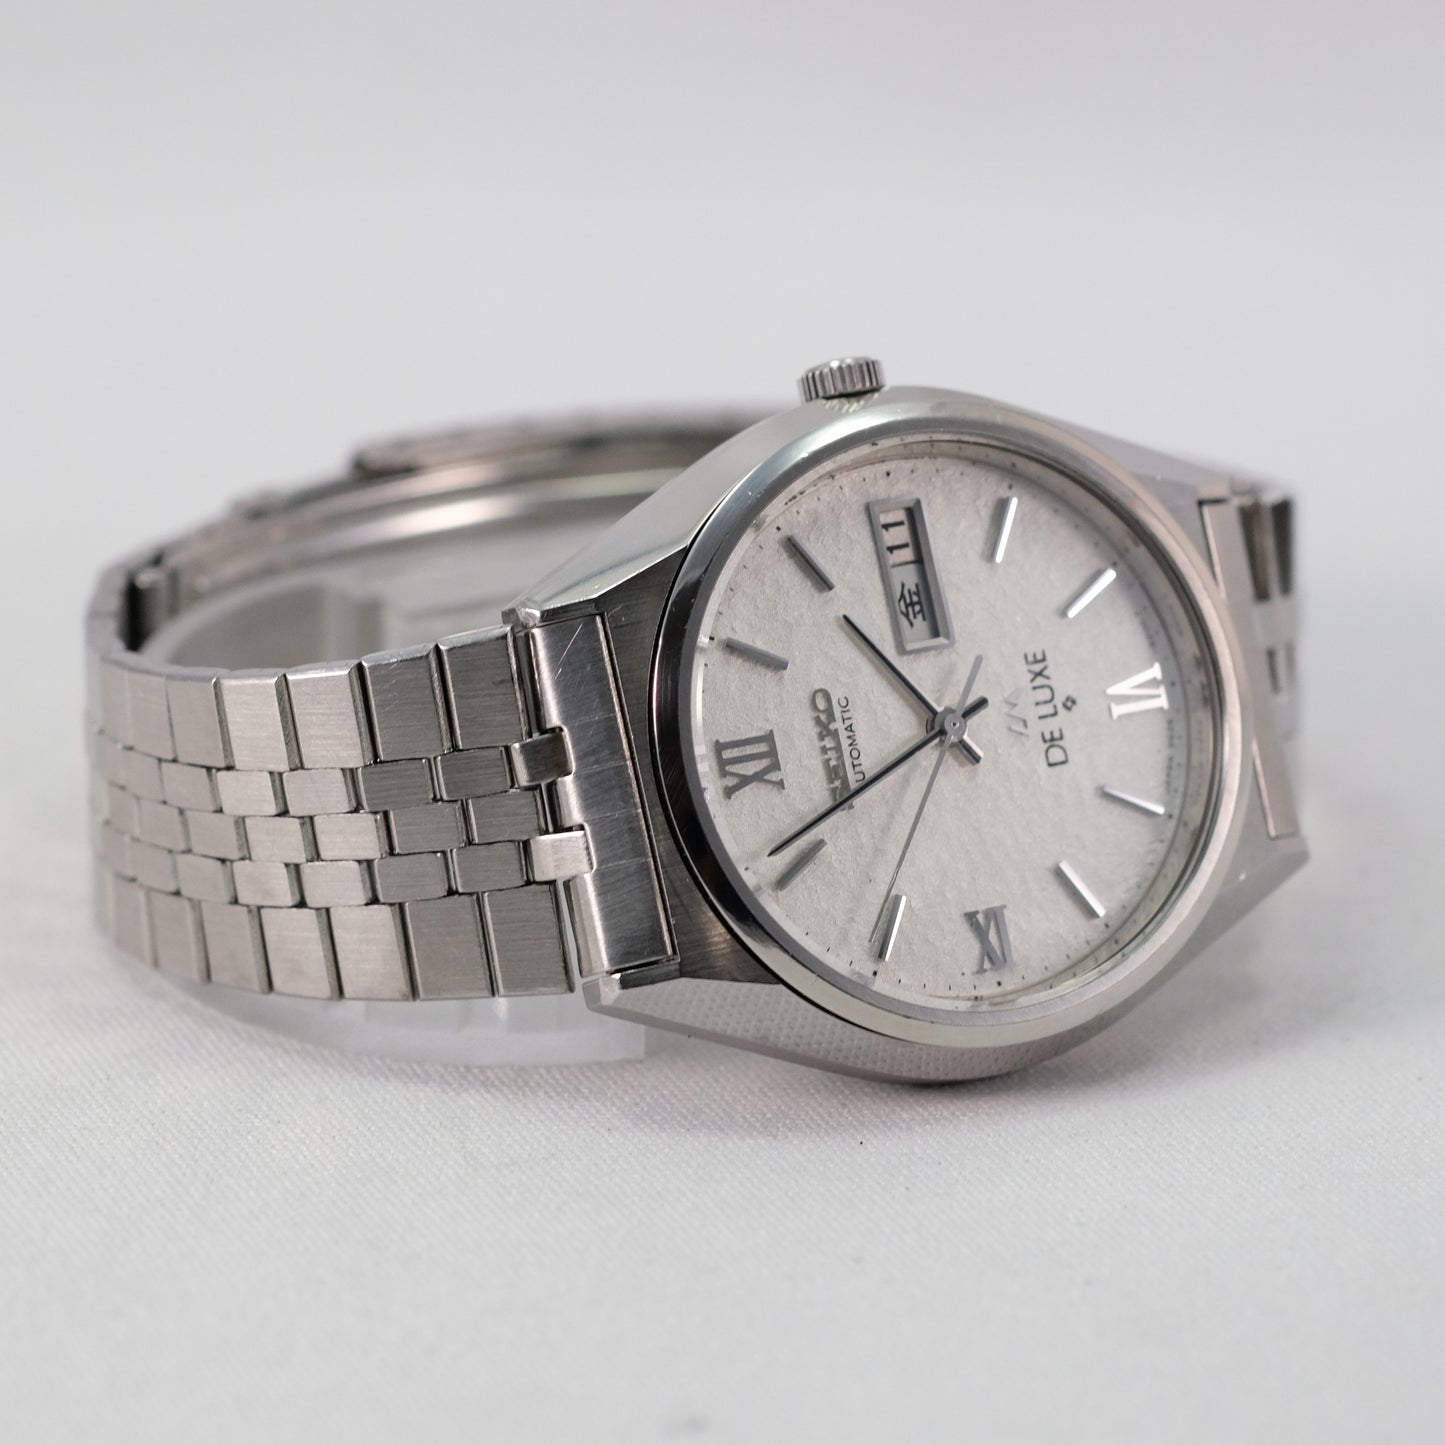 RESERVED! 1975 Seiko LM De Luxe 5626-8160